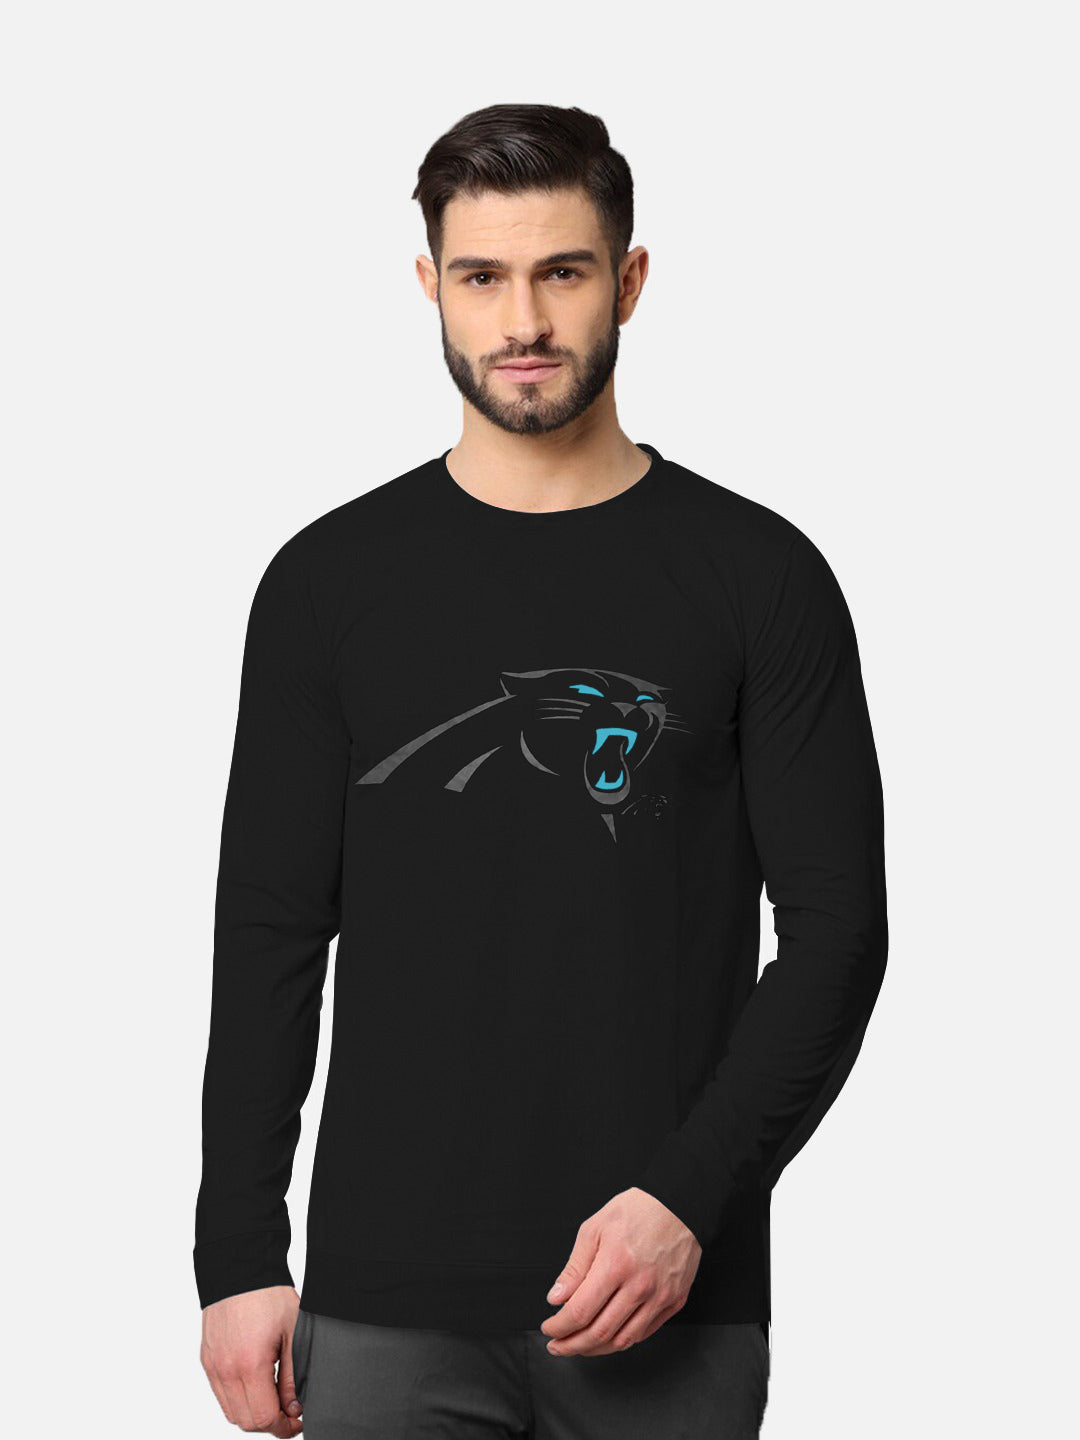 47 Single Jersey Crew Neck Long Sleeve Shirt For Men-Black with Print-SP2031